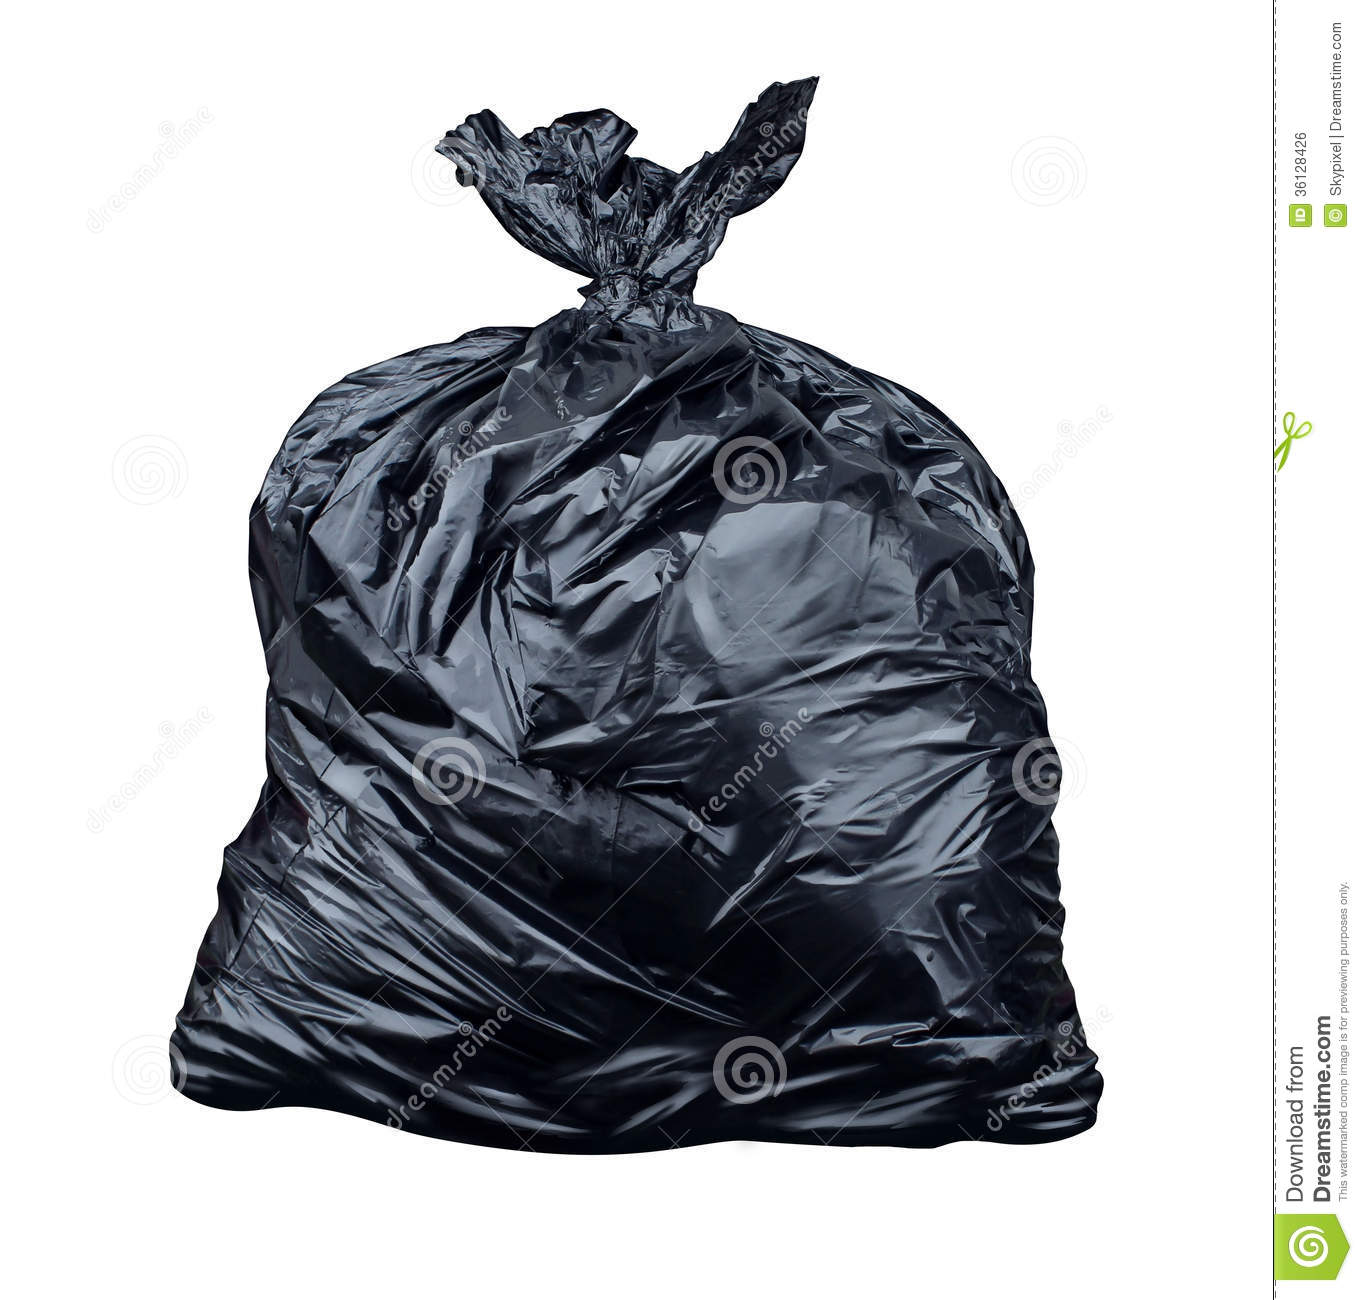 Garbage Bag Isolated On A White Background As A Symbol Of Waste